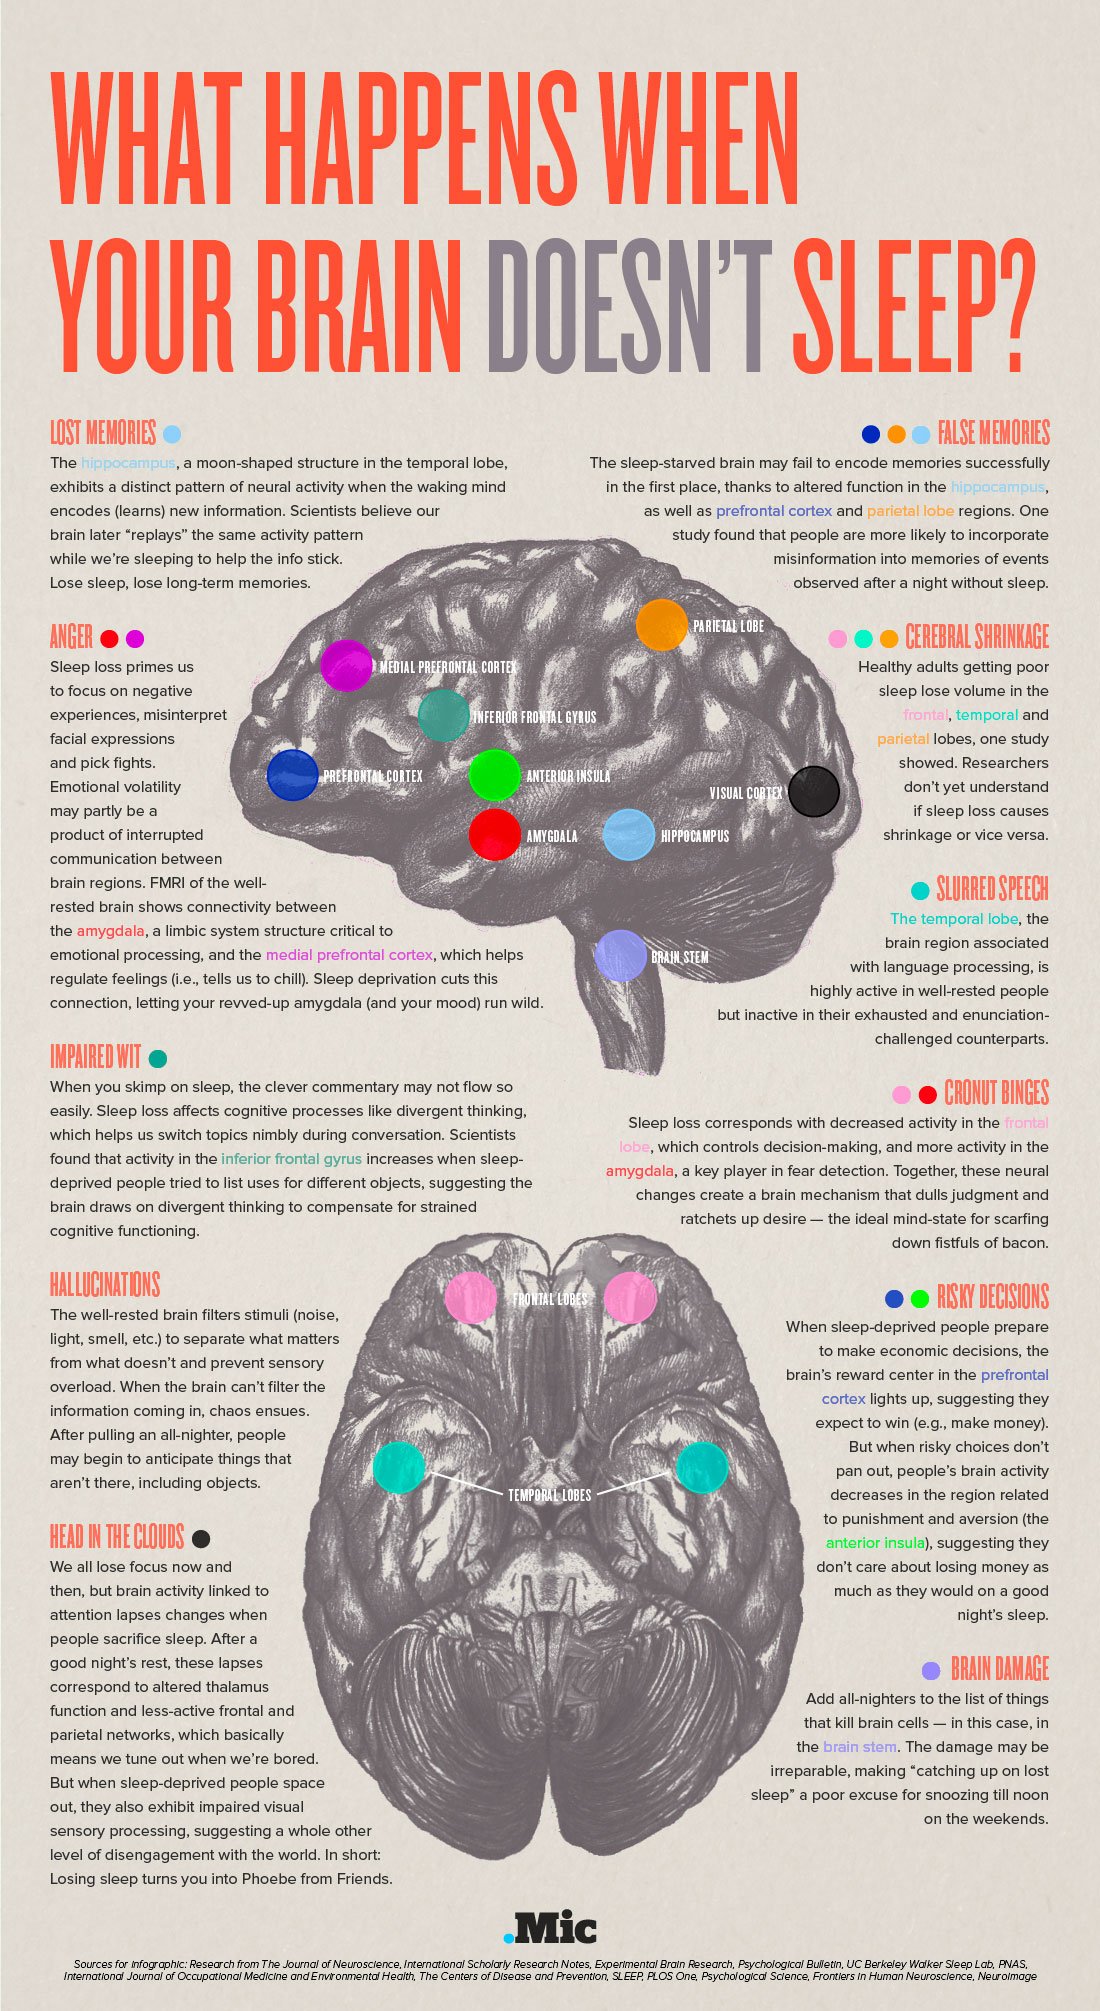 Sleep deprivation and your brain